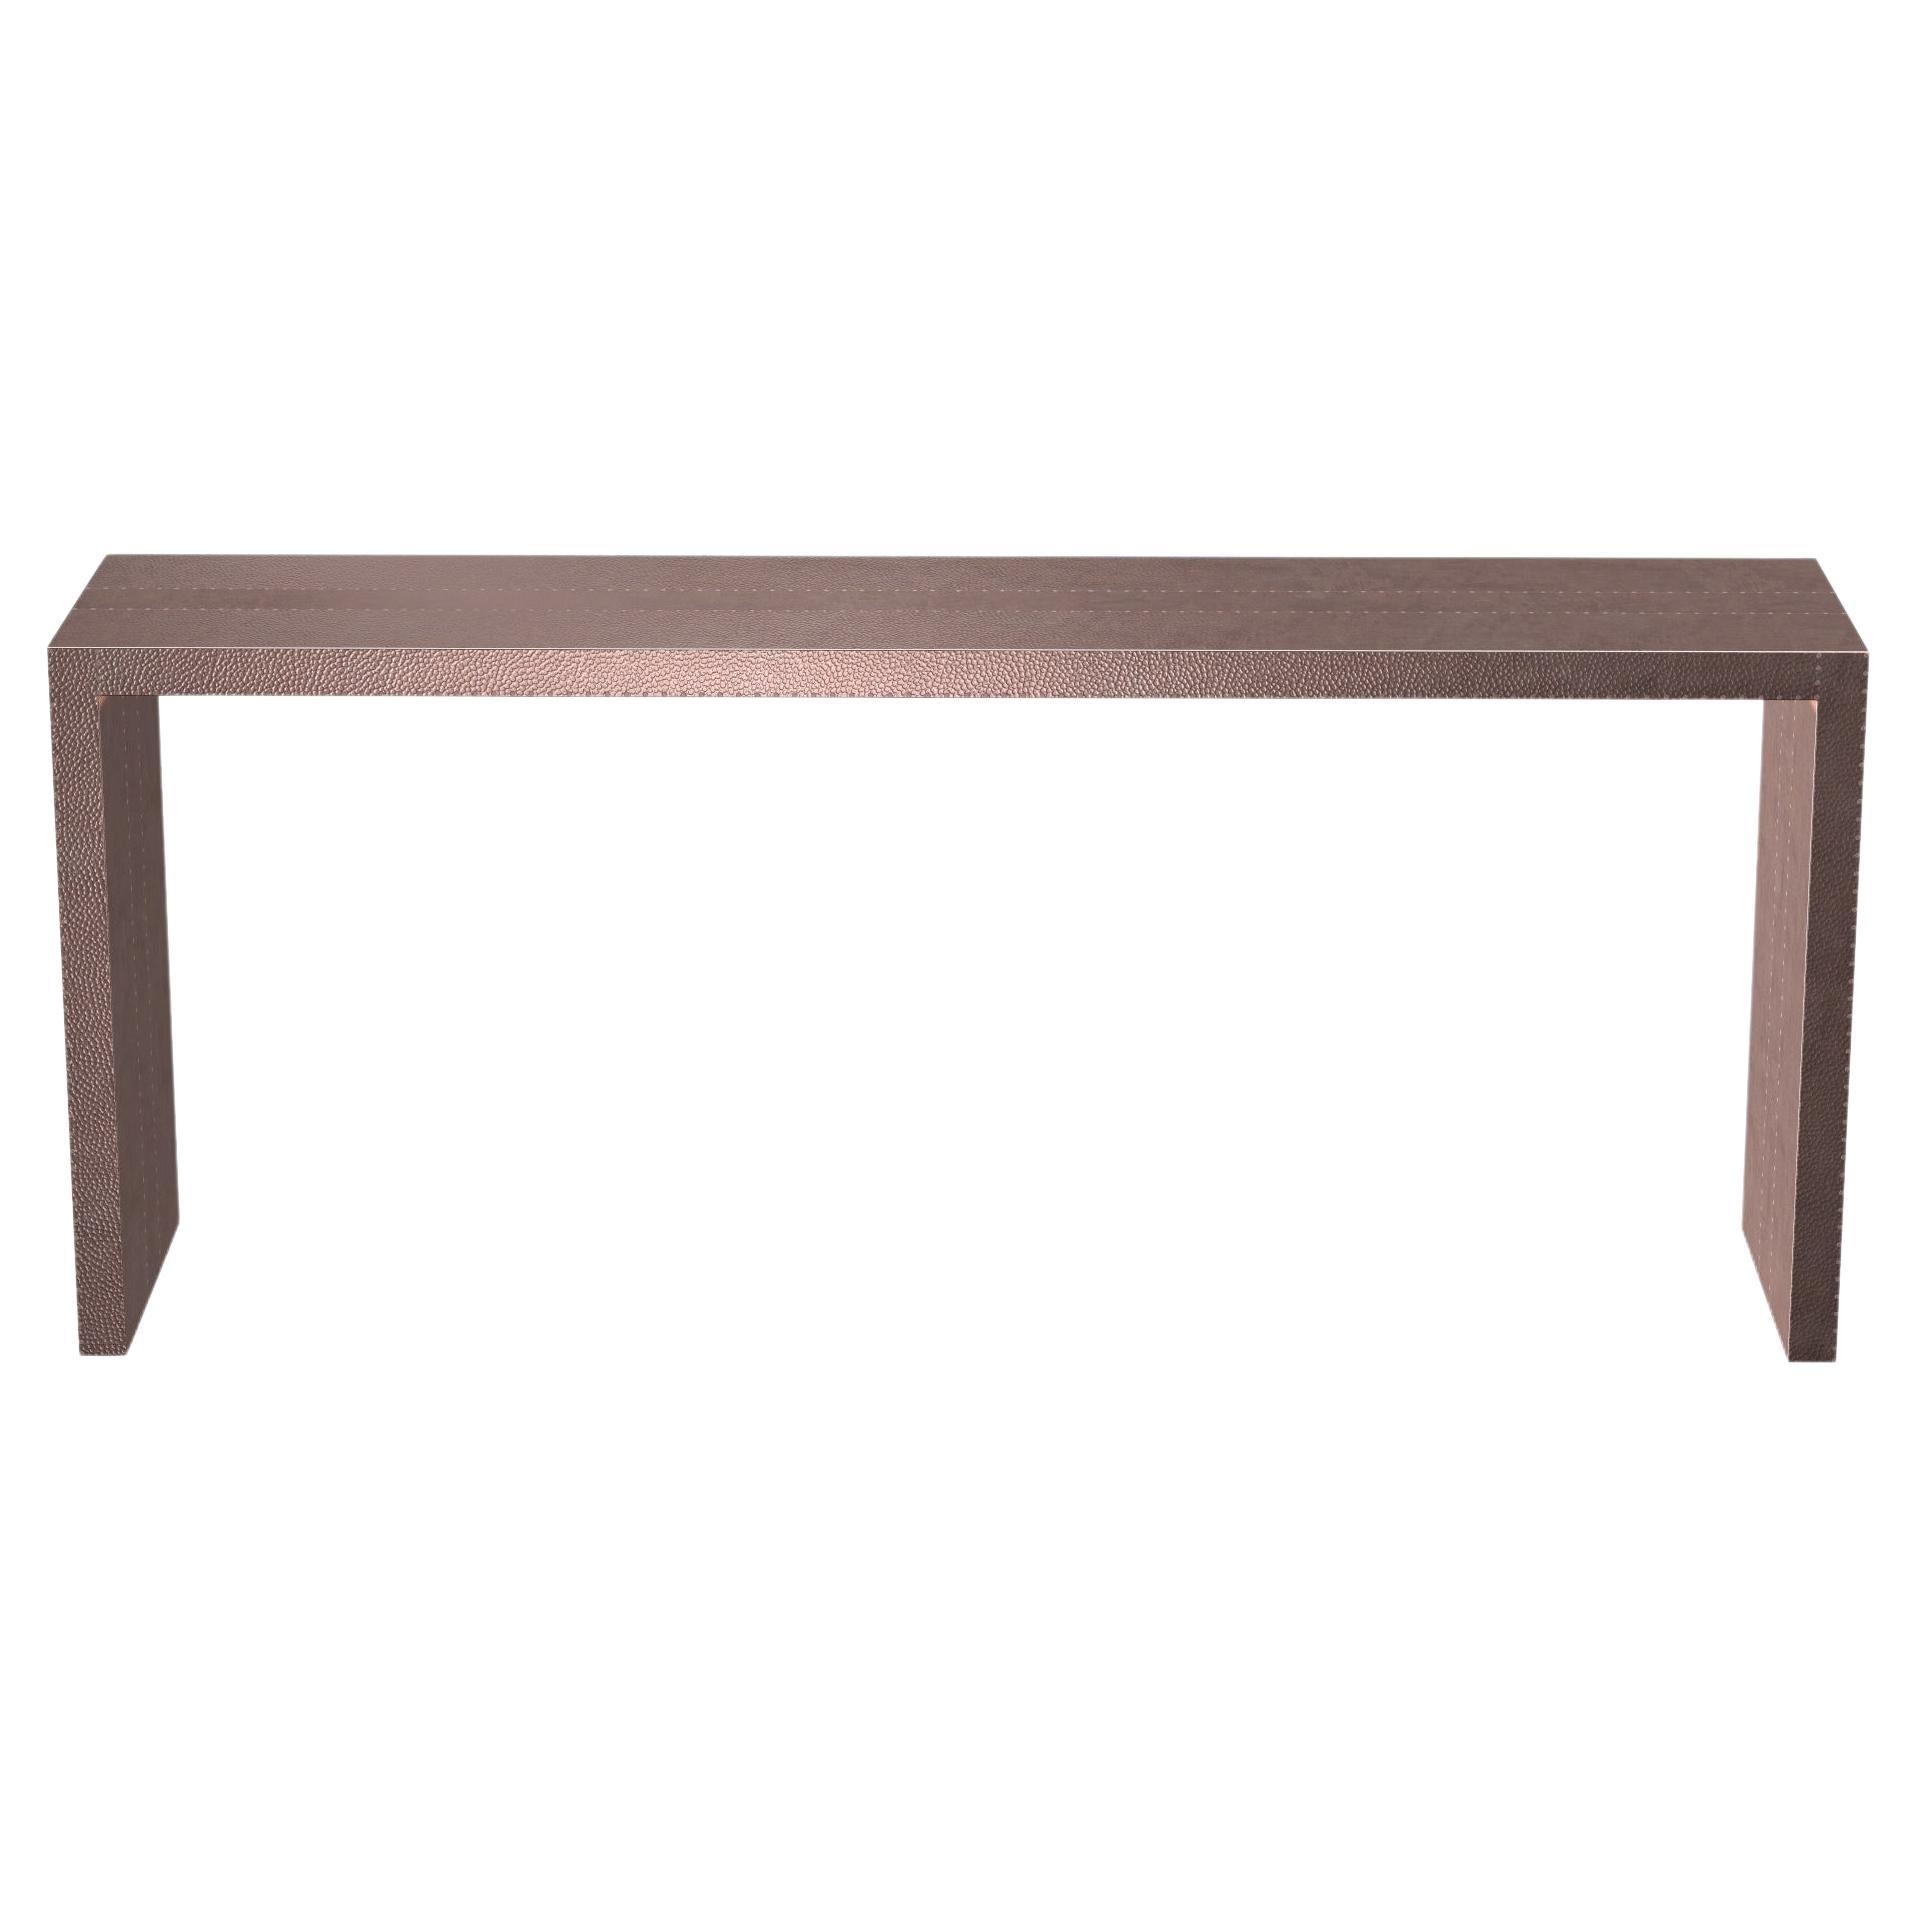 Art Deco Coffee and Cocktail Console Tables Mid.Hammered in Copper  by Alison S For Sale